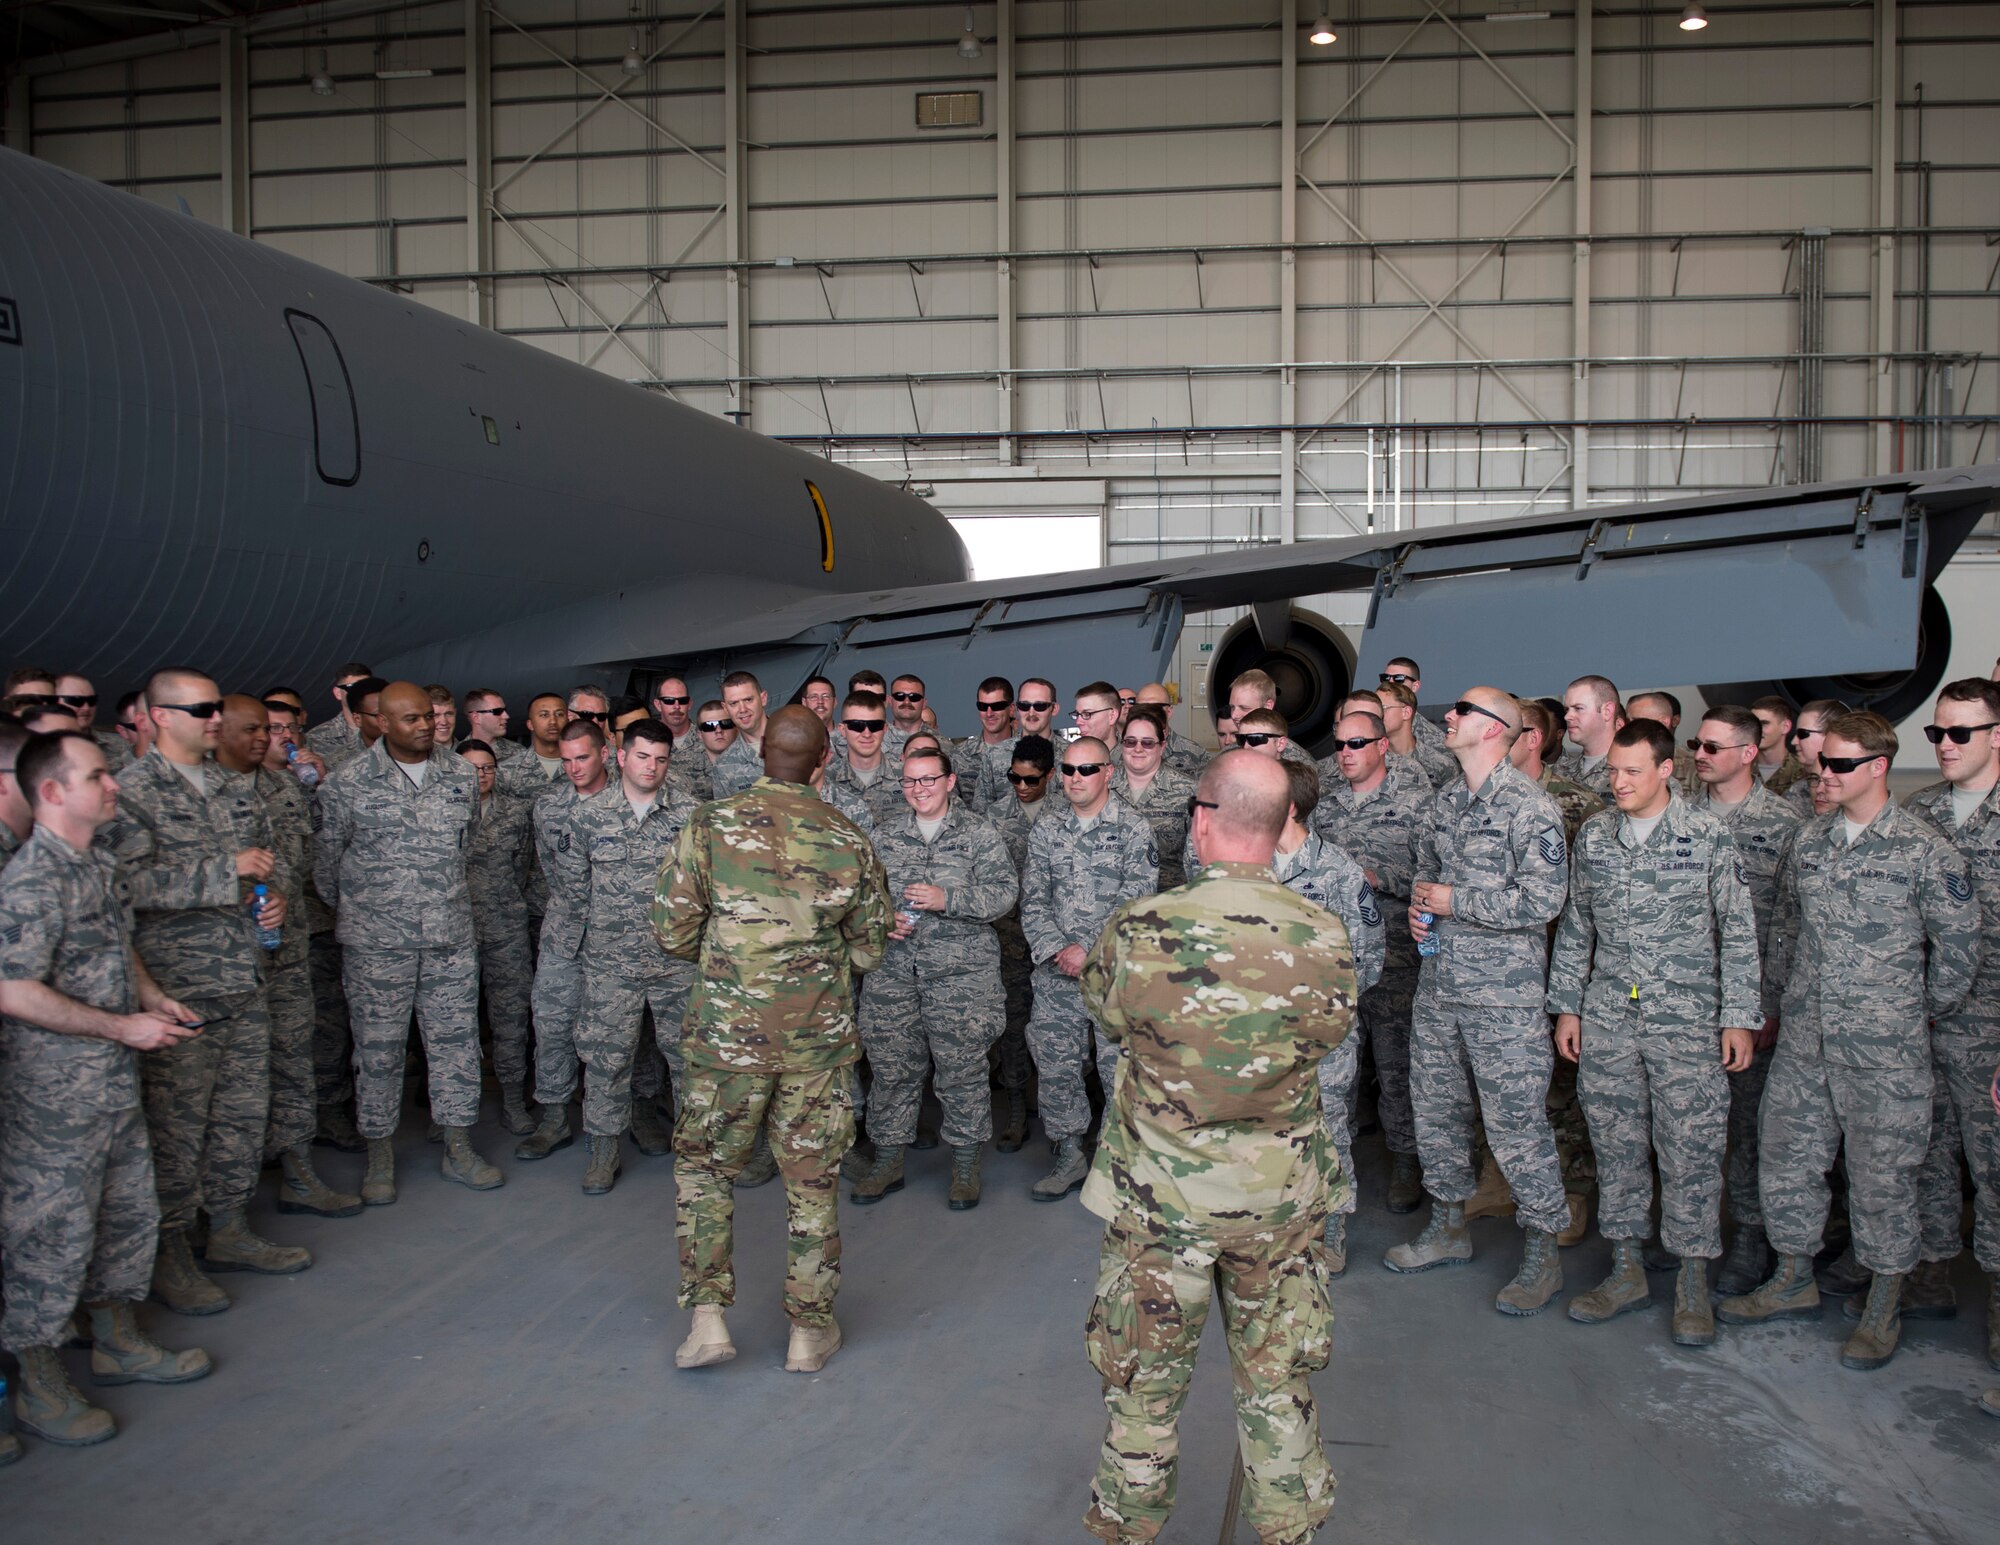 U.S. Air Force Vice Chief of Staff Gen. Stephen W. Wilson and Chief Master Sgt. of the Air Force Kaleth O. Wright visit Airmen with the 379th Expeditionary Maintenance Group at Al Udeid Air Base, Qatar, April 12, 2017. Throughout their visit, Wilson and Wright made stops to units across the wing, providing an opportunity for the Airmen to speak about their duties and ask questions they had. (U.S. Air Force photo by Tech. Sgt. Amy M. Lovgren)